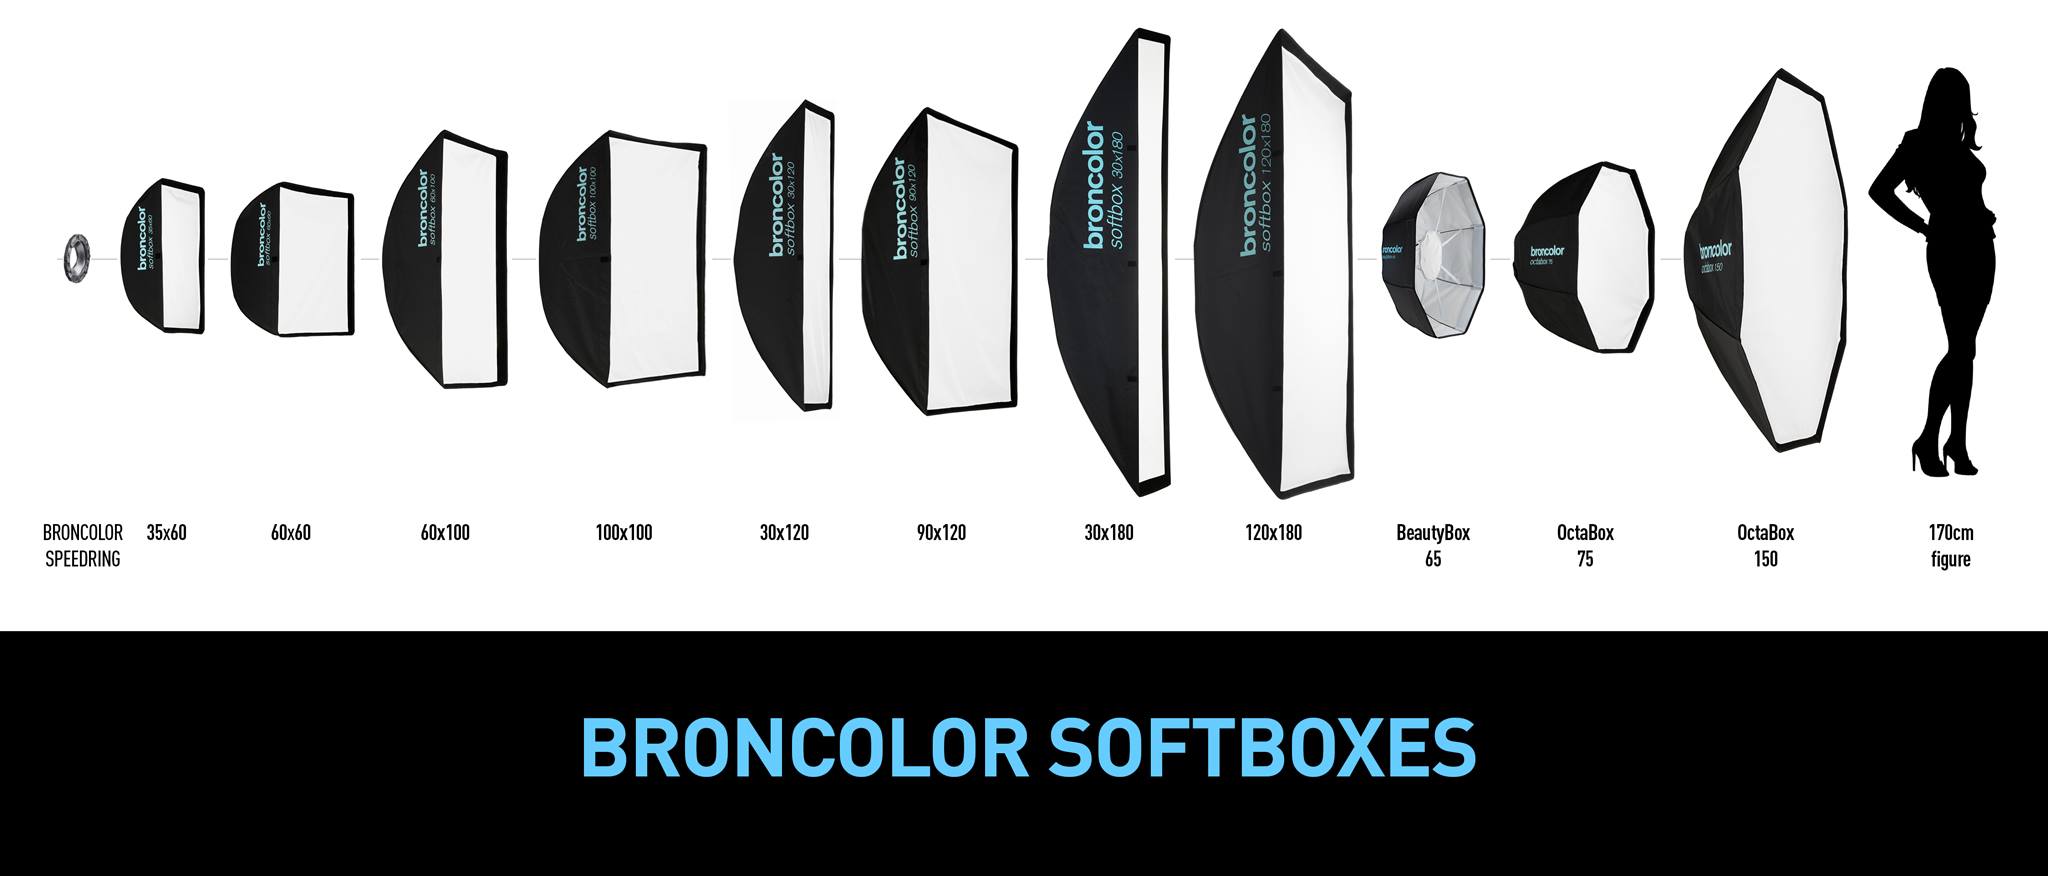 Rectangular, Square, Octagonal, Stip: various shapes and sizes of Softboxes provide you with the flexibility you need to achieve premium quality work.